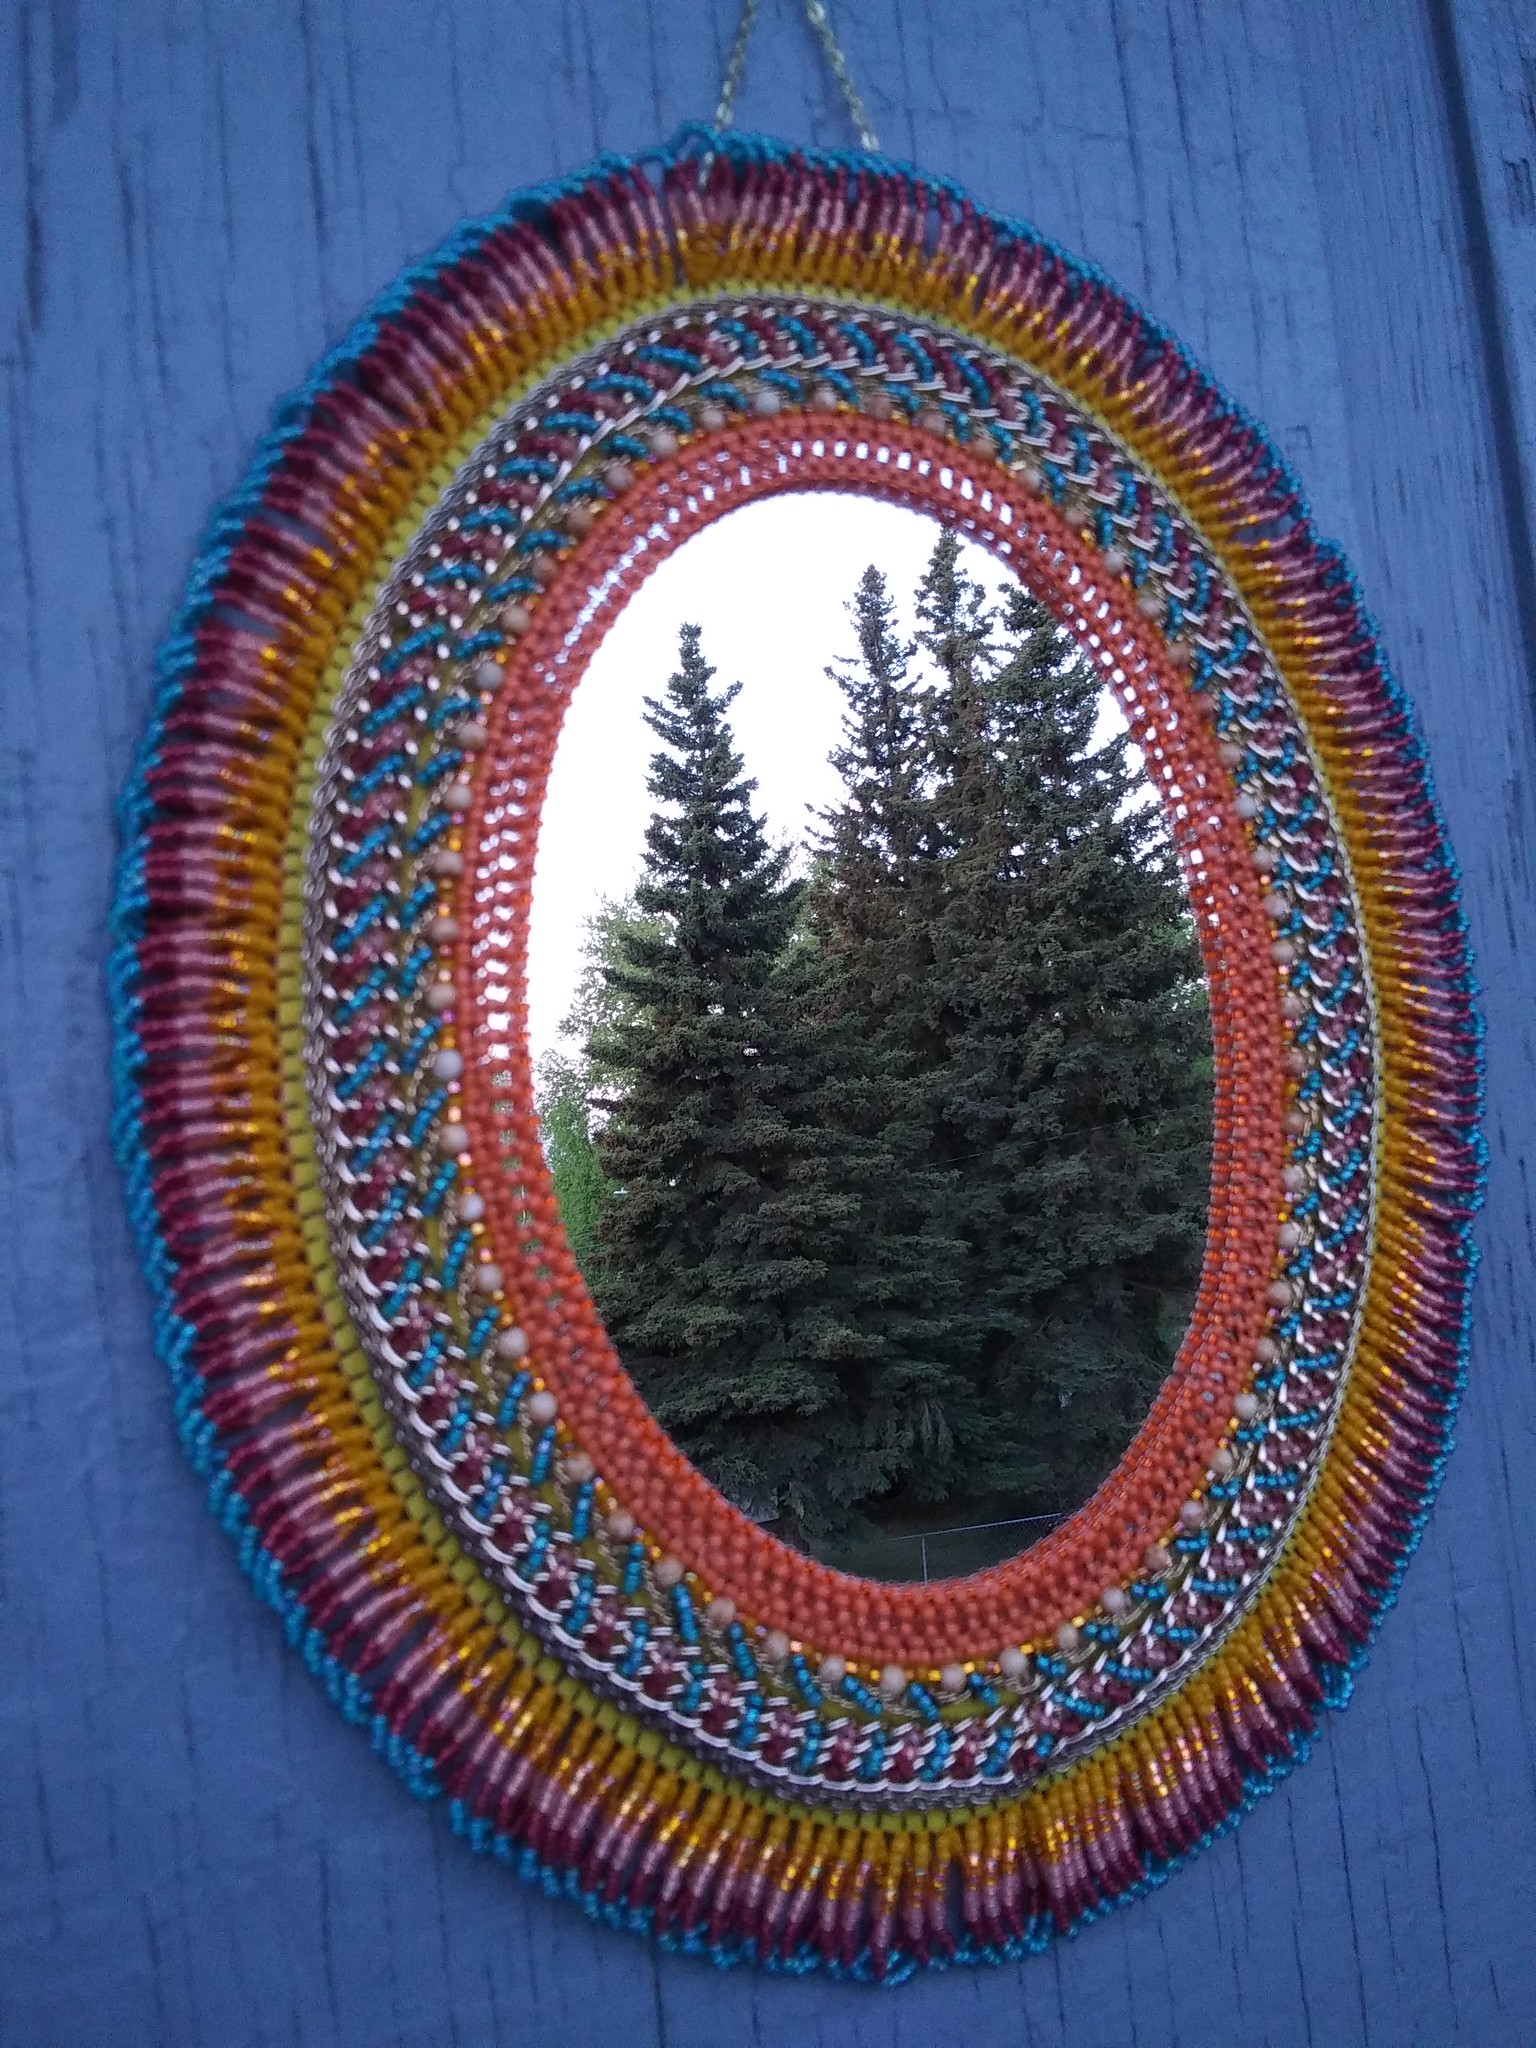 Finished wall mirror with jewelry chain as an embroidery material